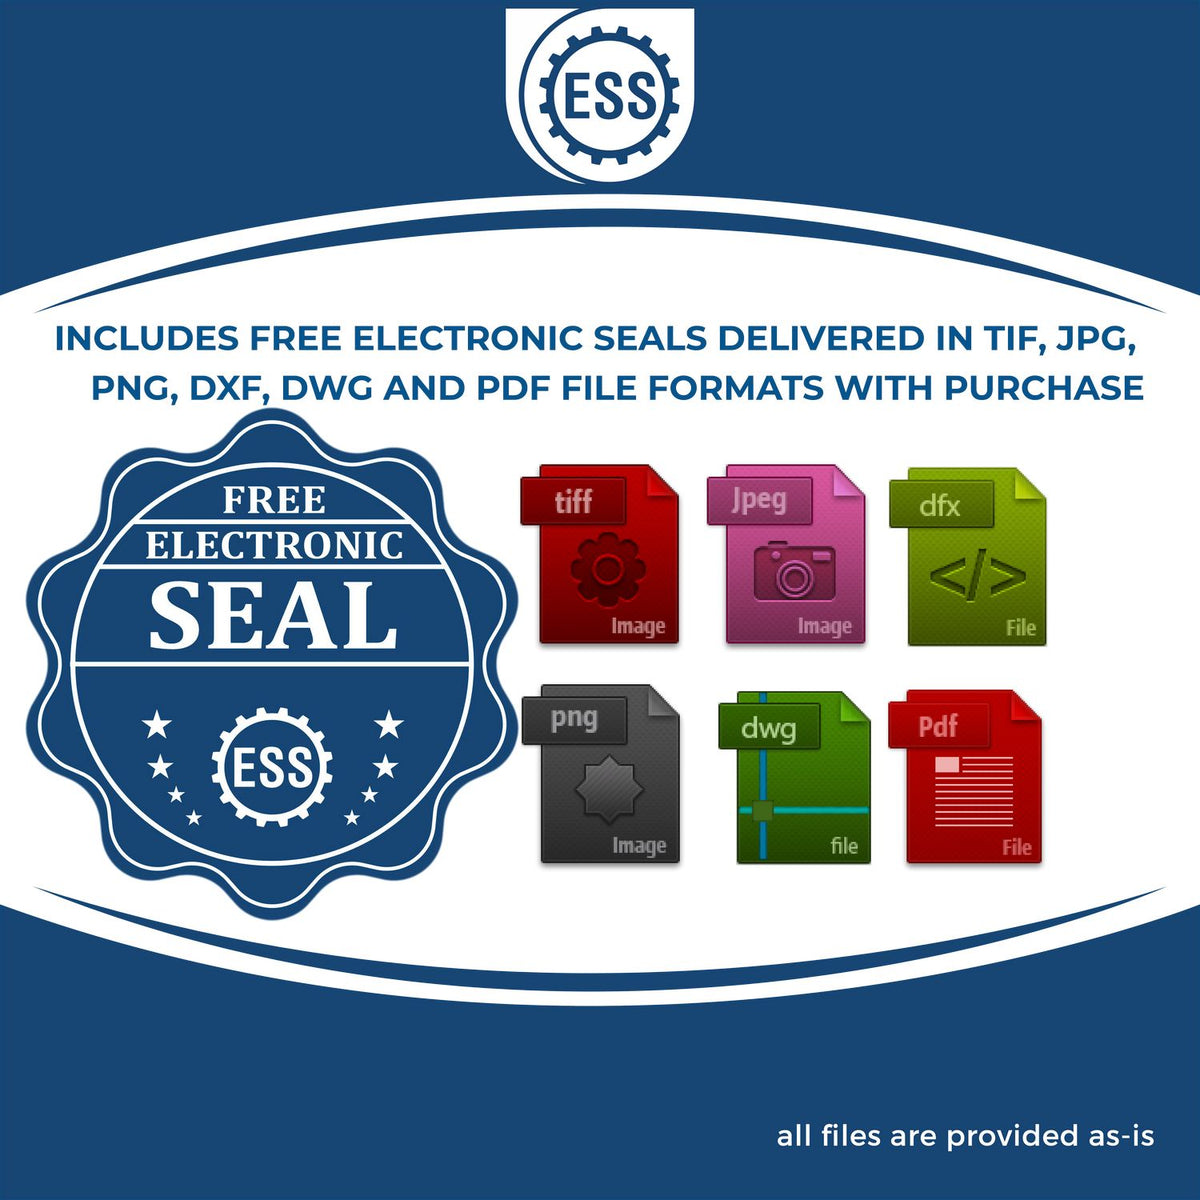 An infographic for the free electronic seal for the State of Florida Extended Long Reach Geologist Seal illustrating the different file type icons such as DXF, DWG, TIF, JPG and PNG.